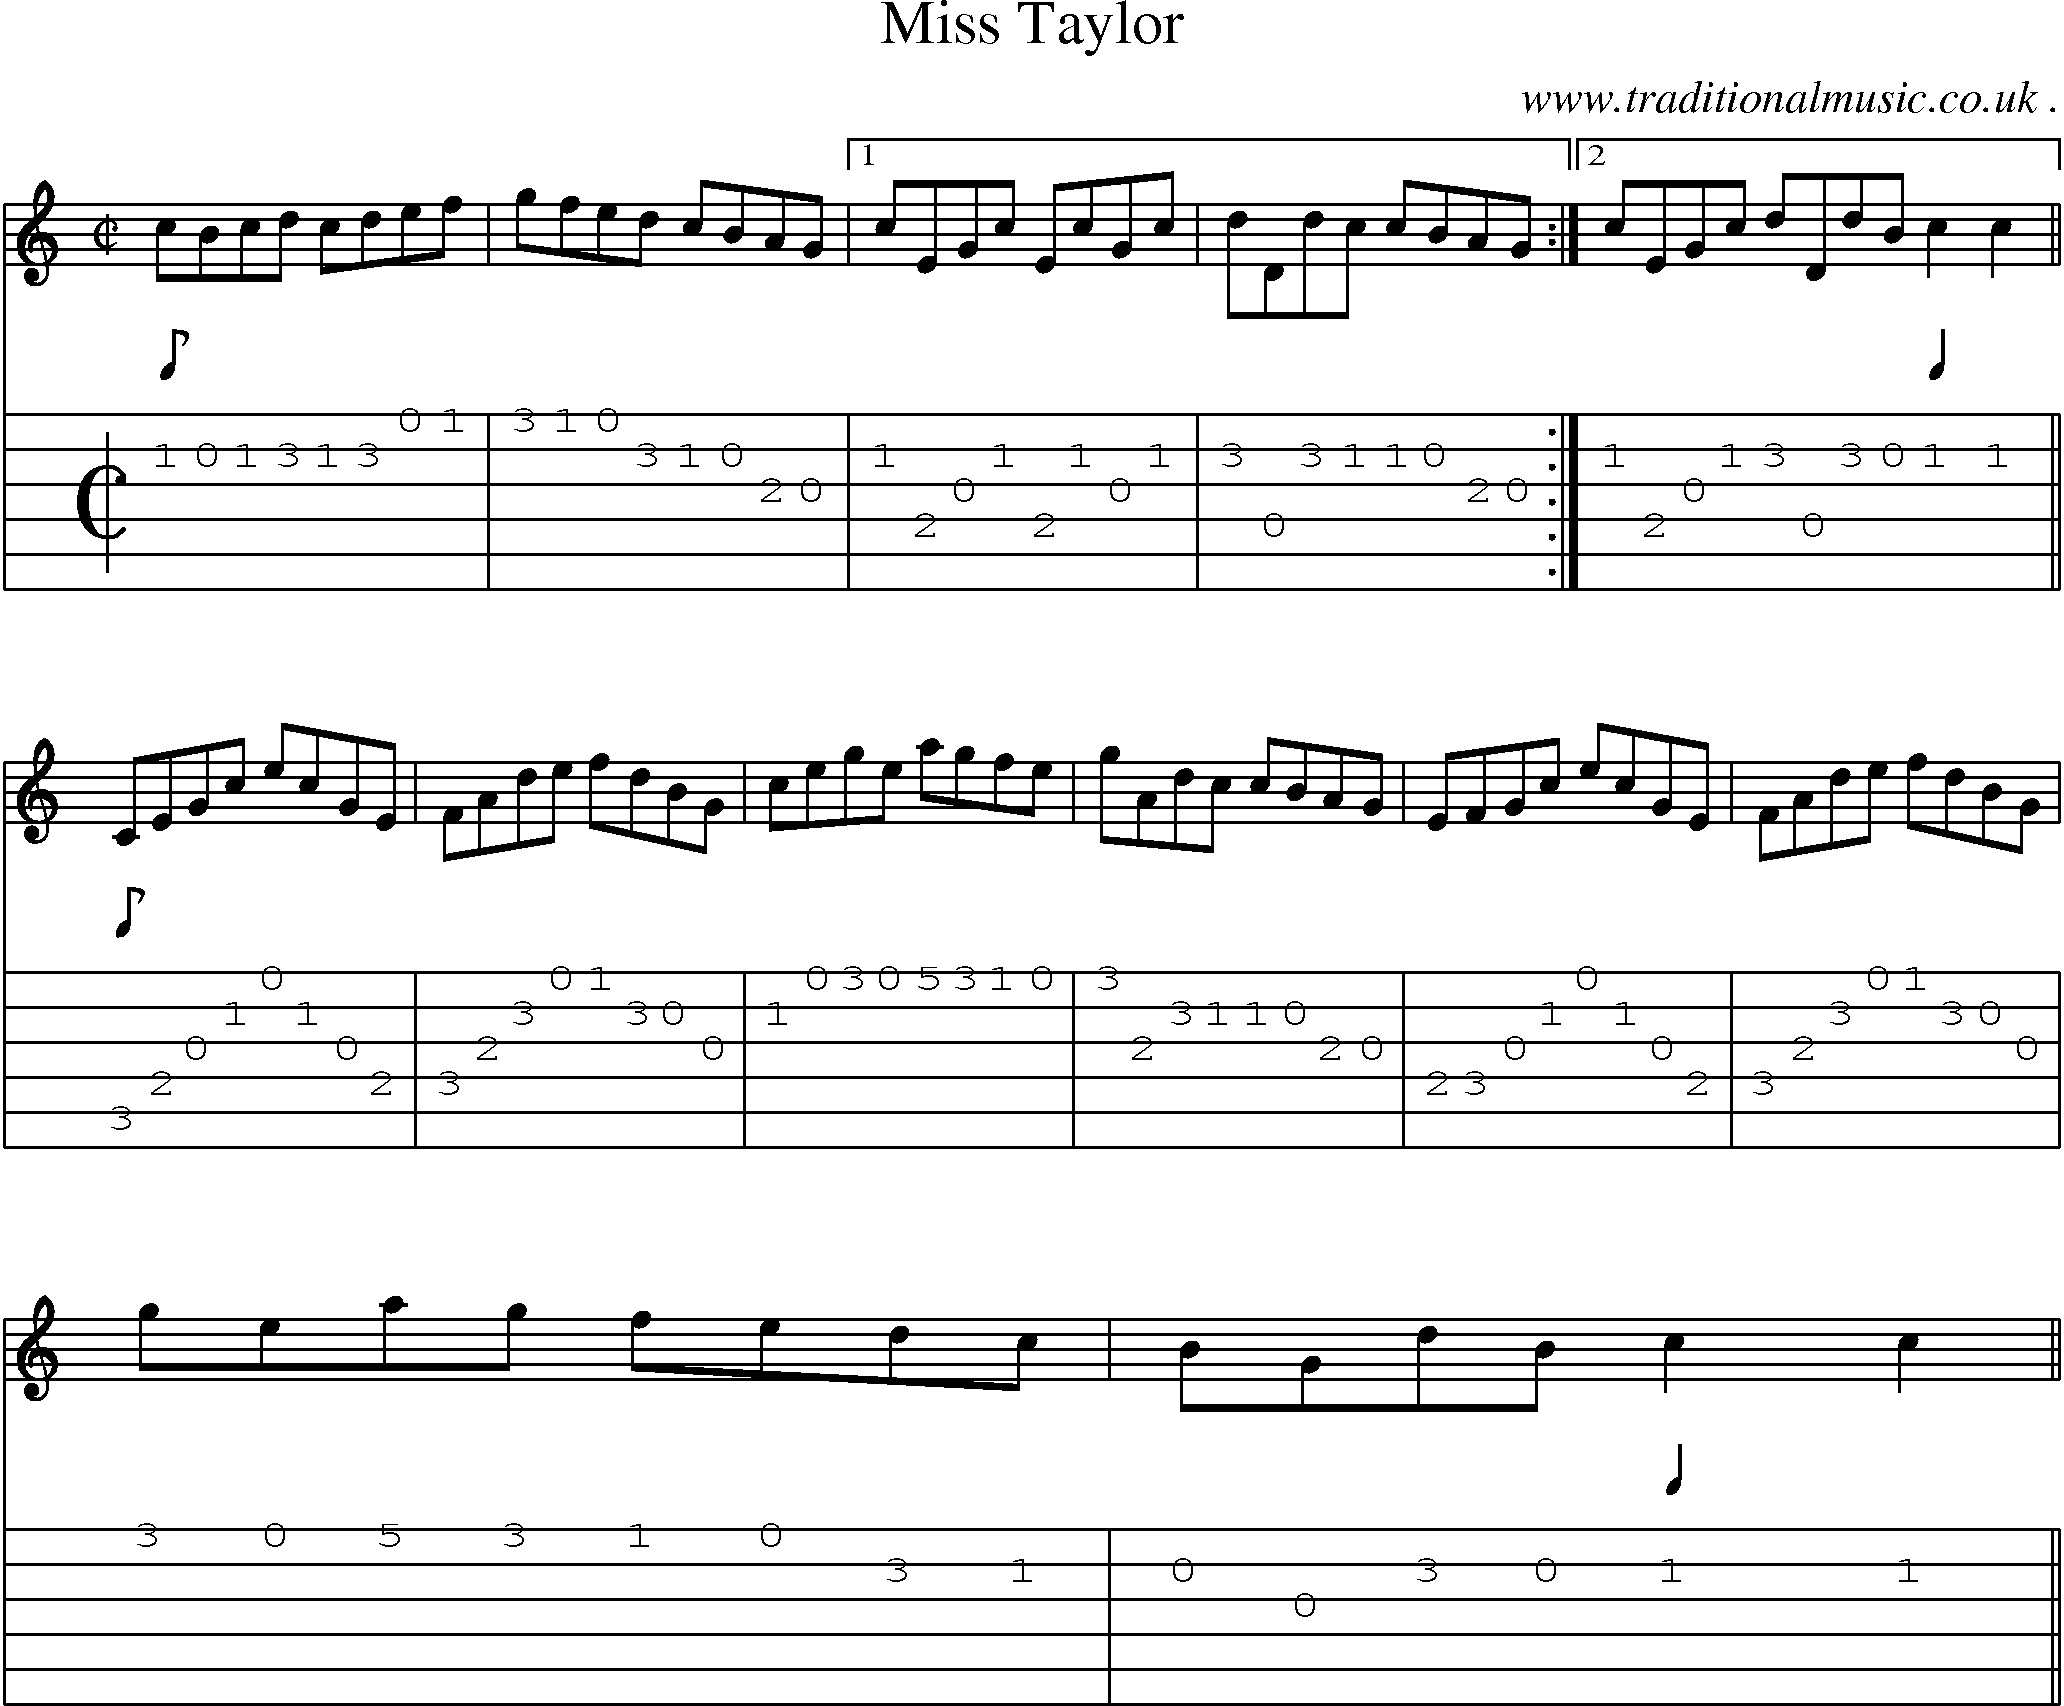 Sheet-music  score, Chords and Guitar Tabs for Miss Taylor